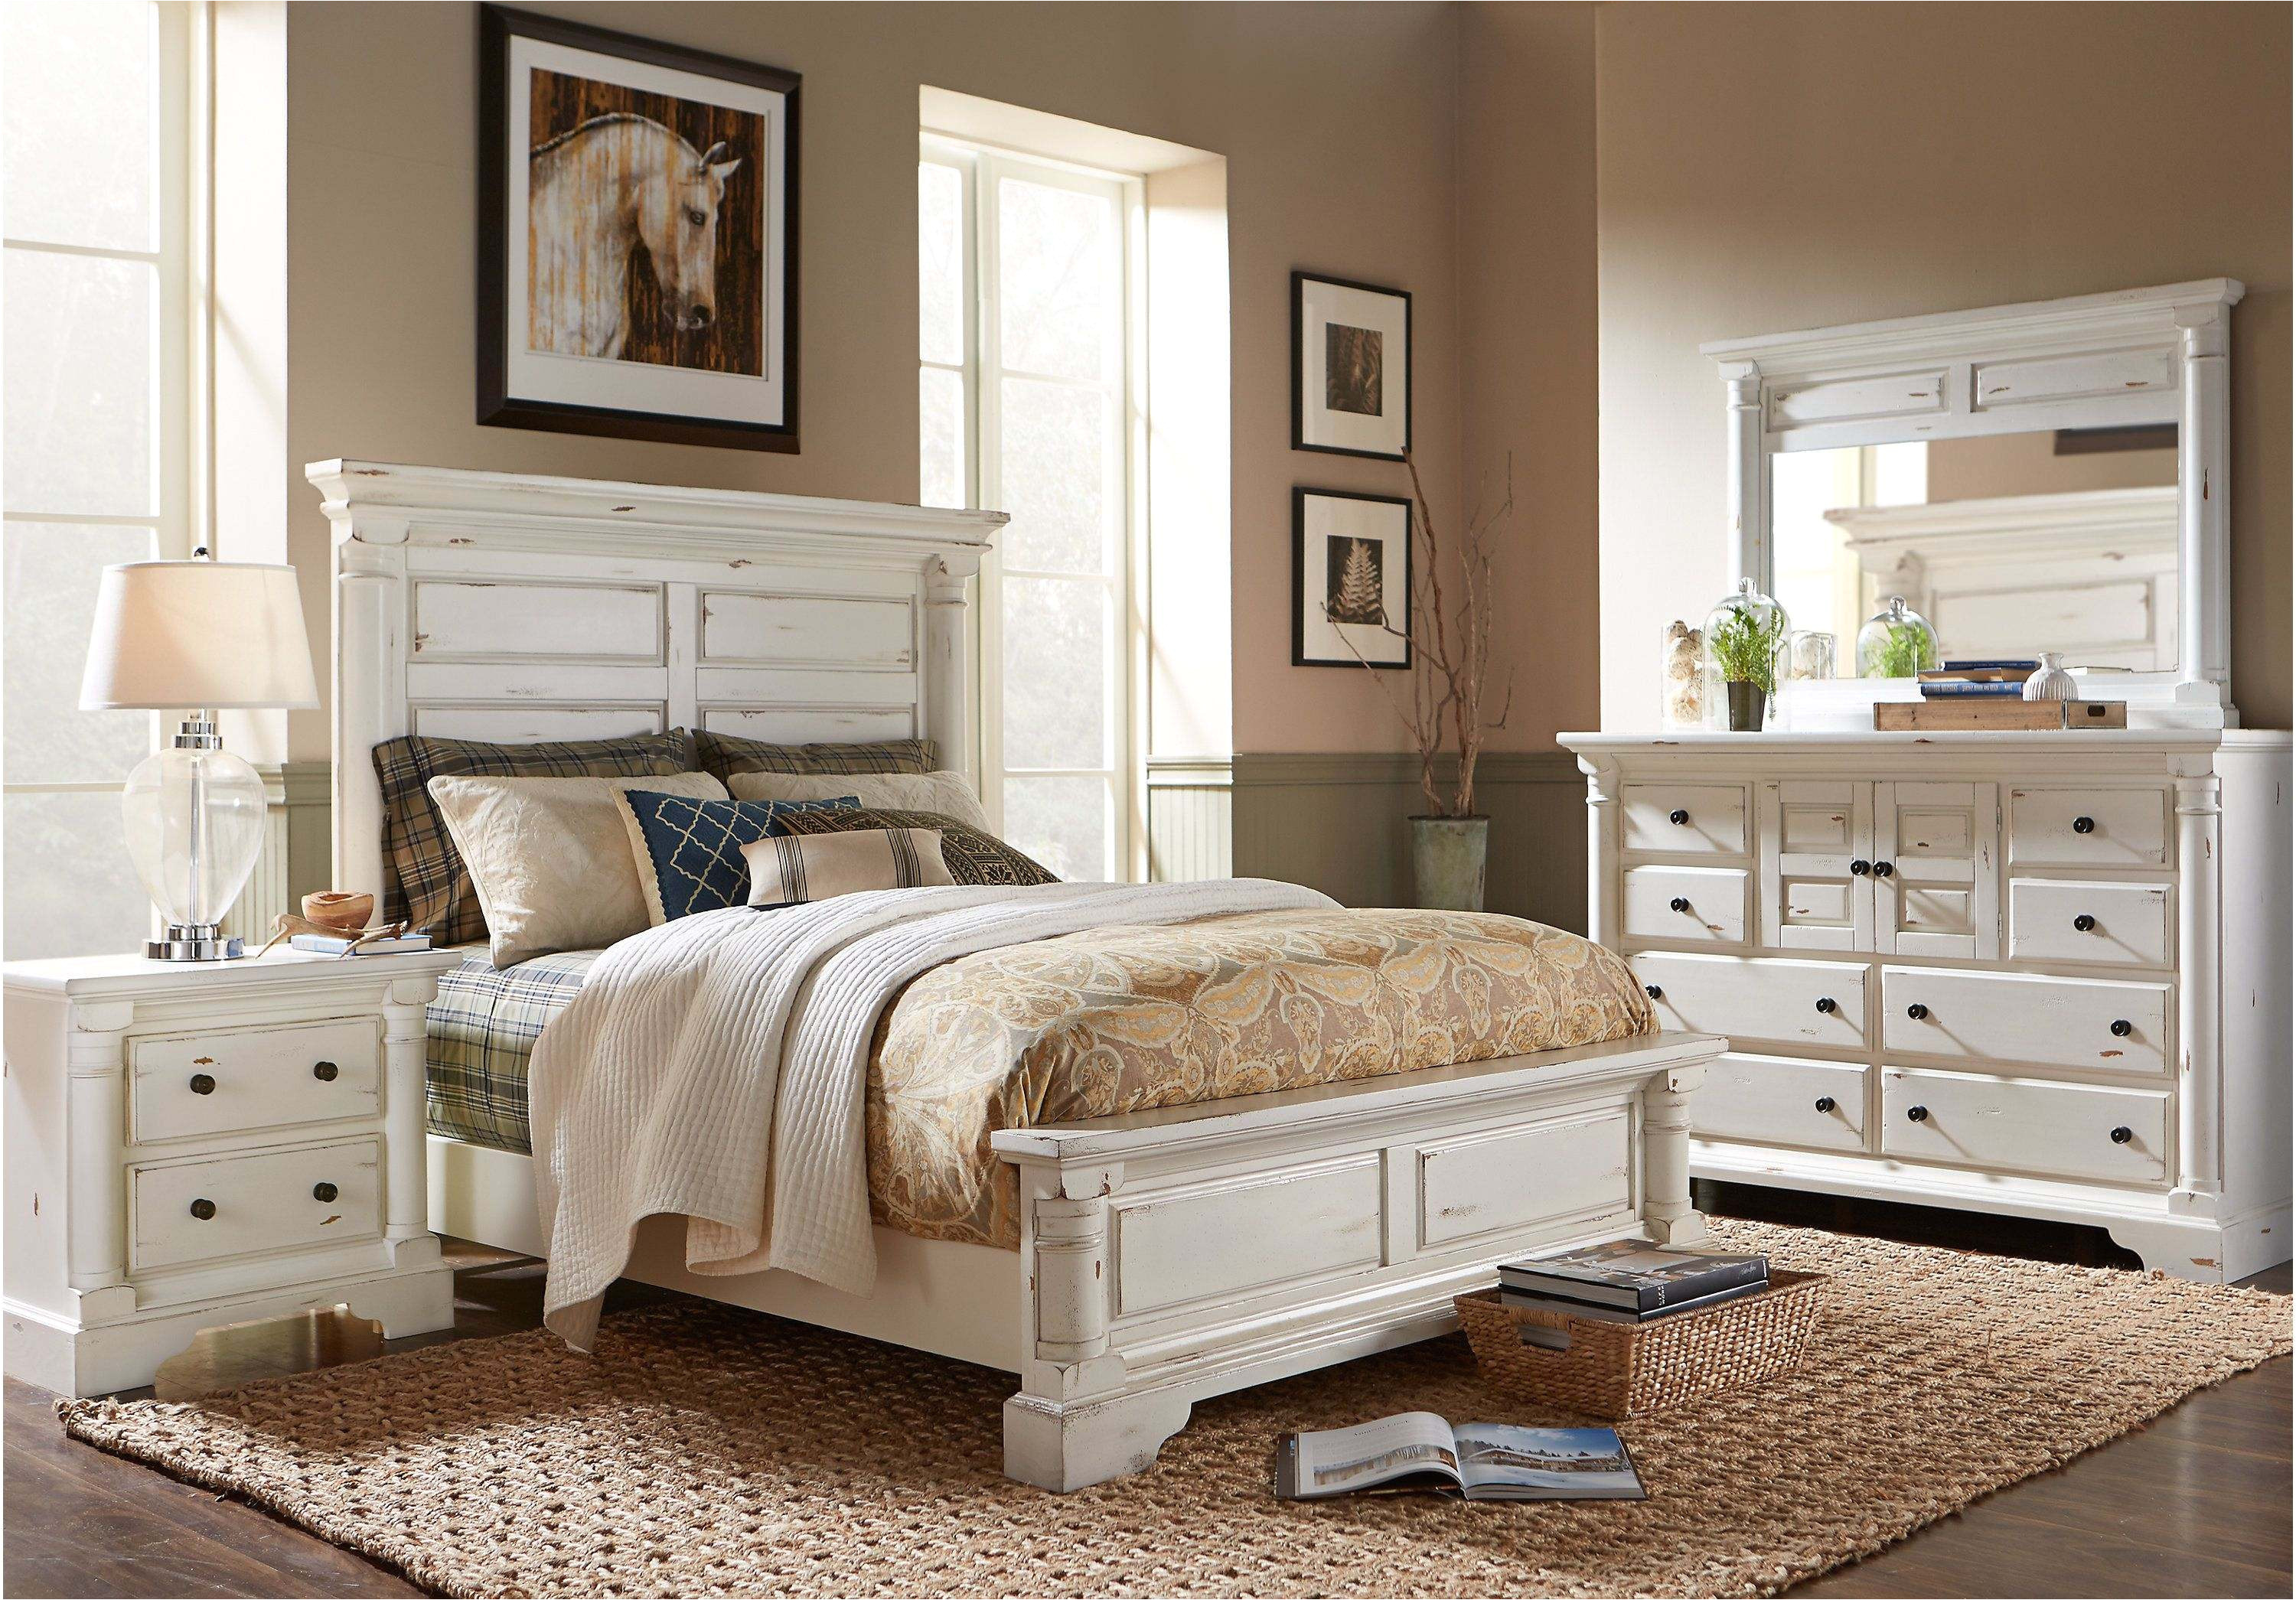 furniture row bedroom sets 27 new american freight bedroom